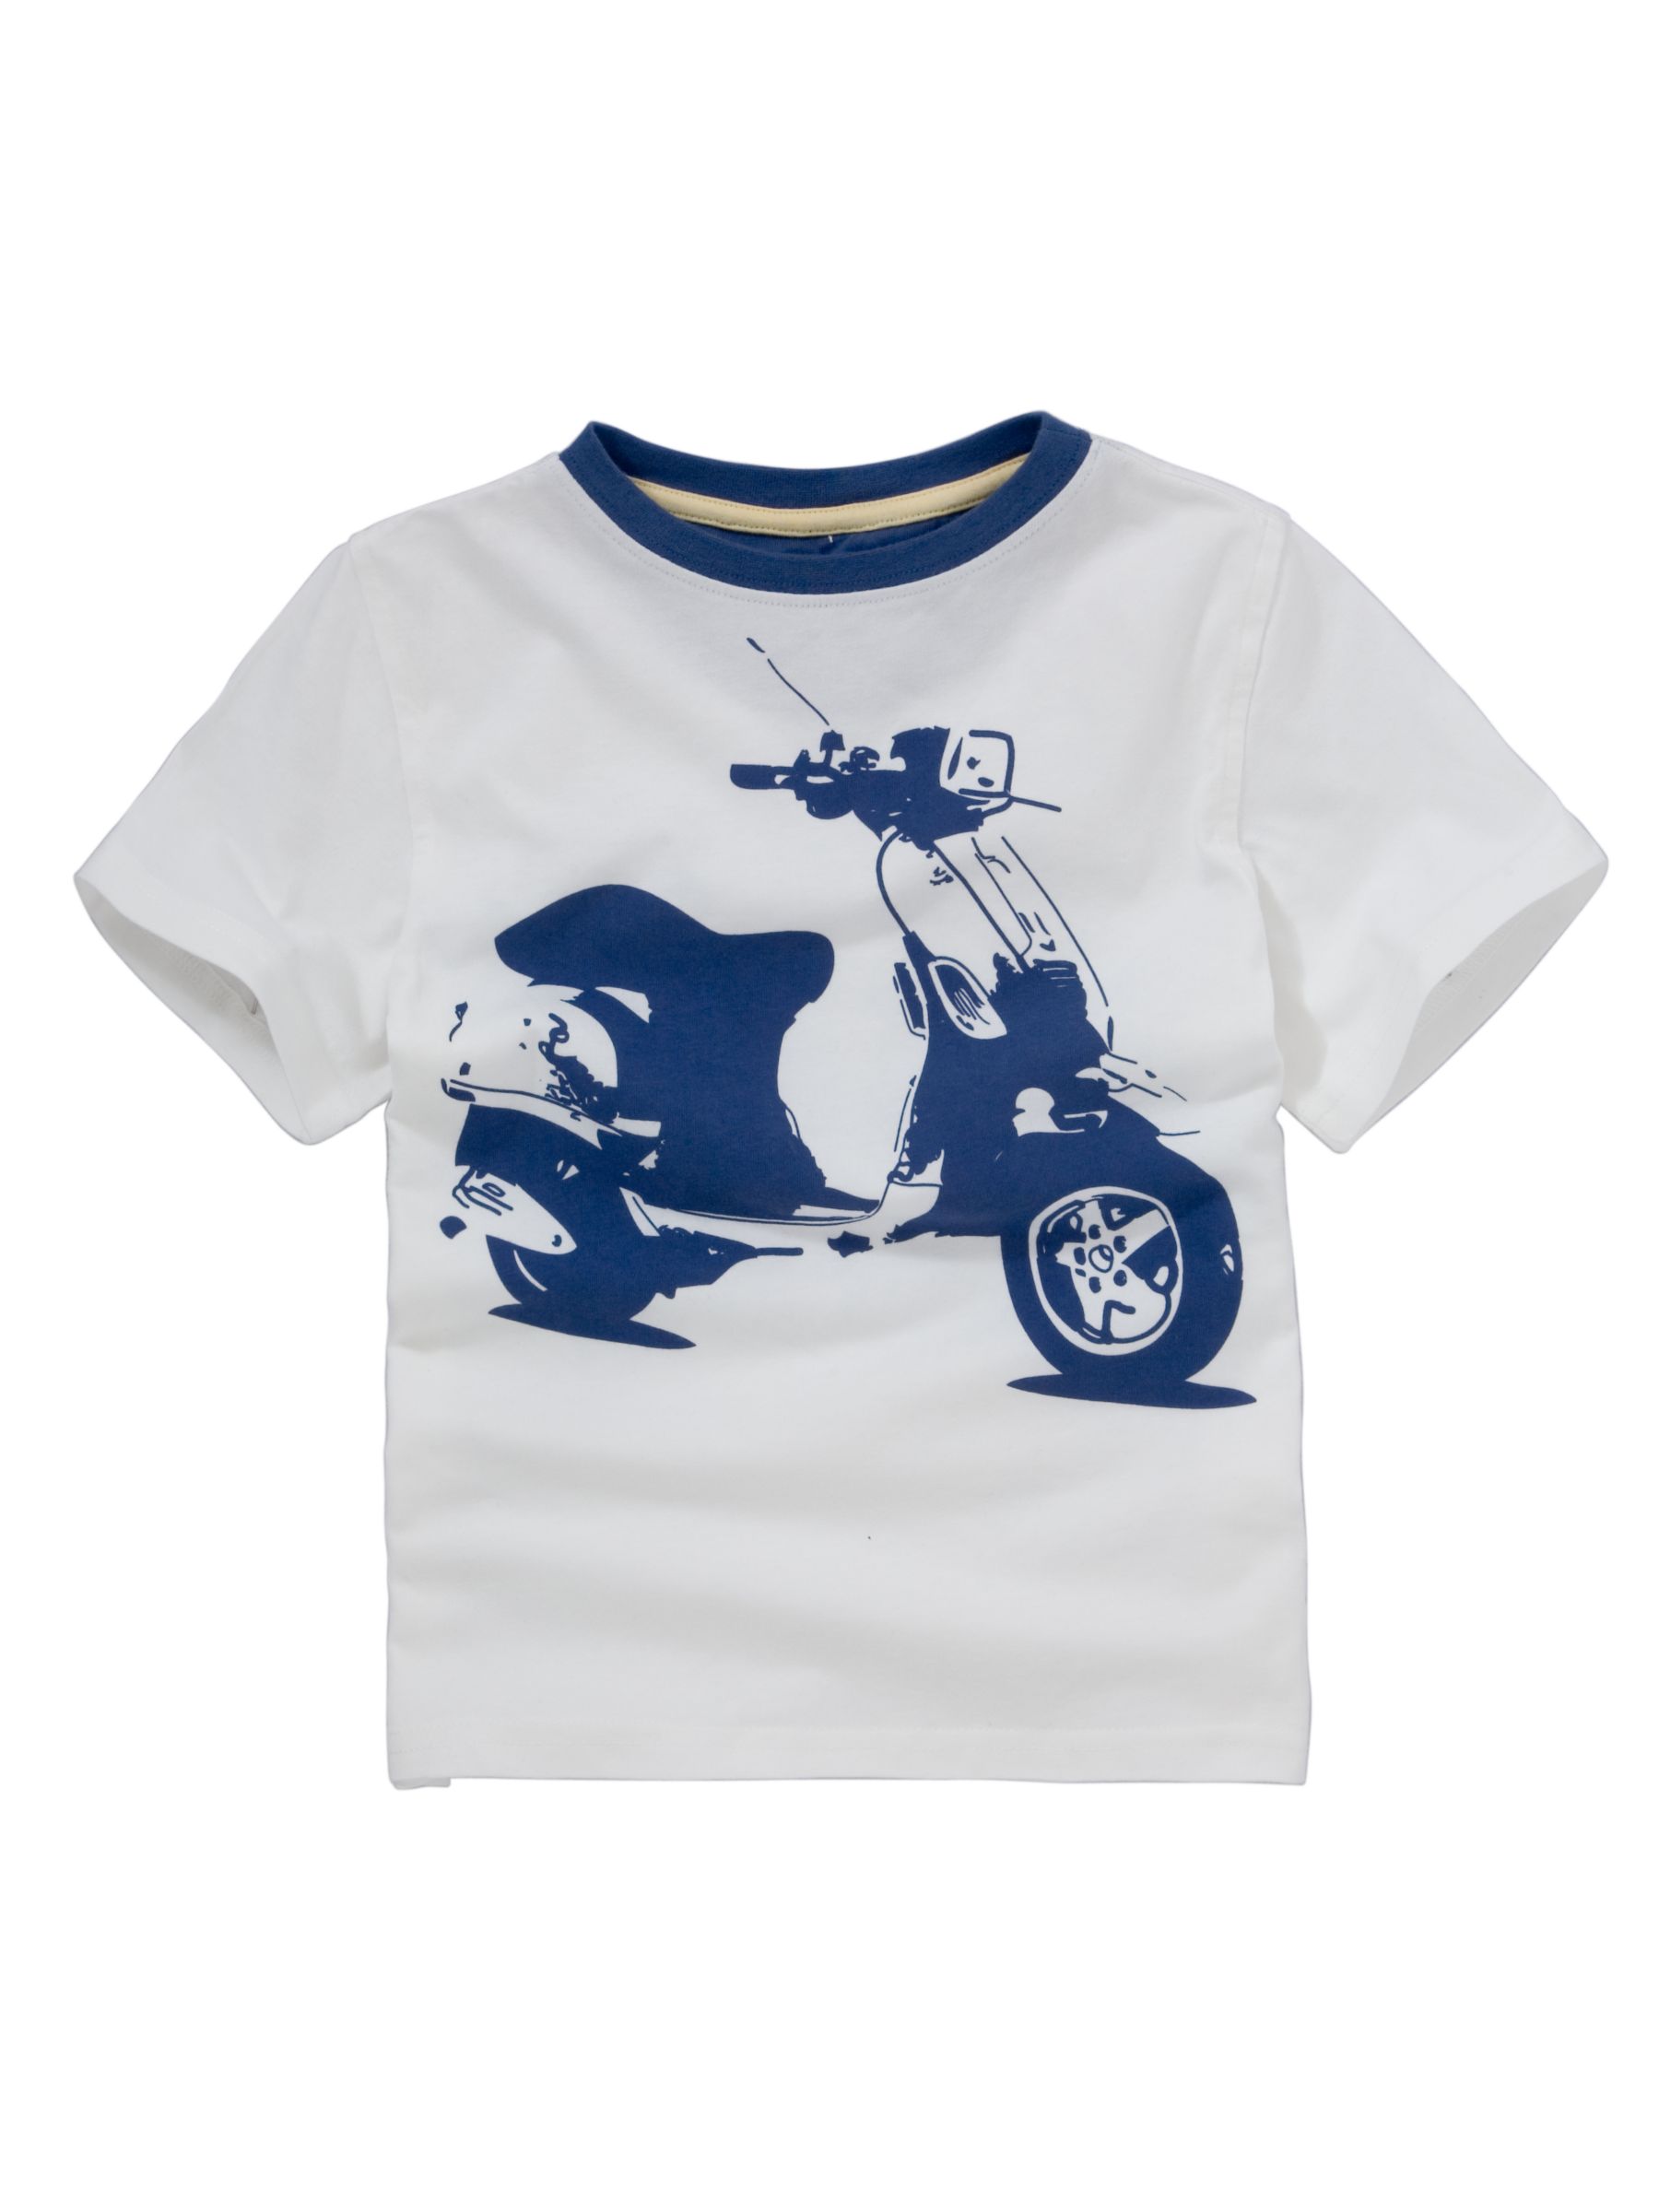 Scooter T-Shirt, White